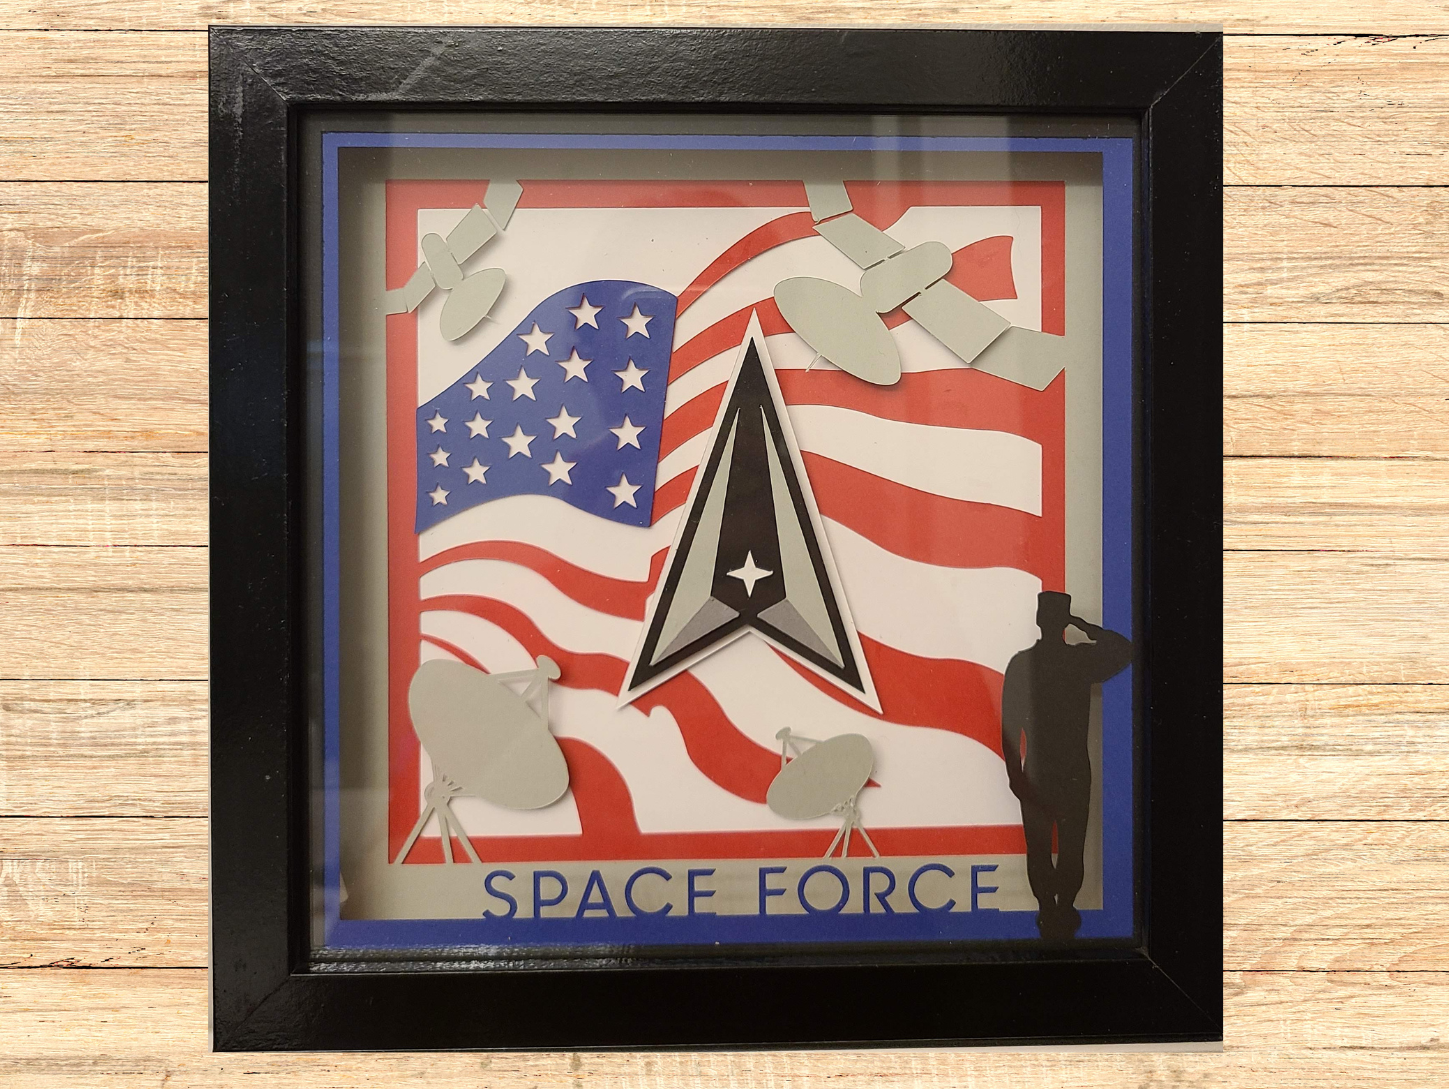 How To Make A Layered Space Force Shadow Box with Lights (Tutorial Video!)